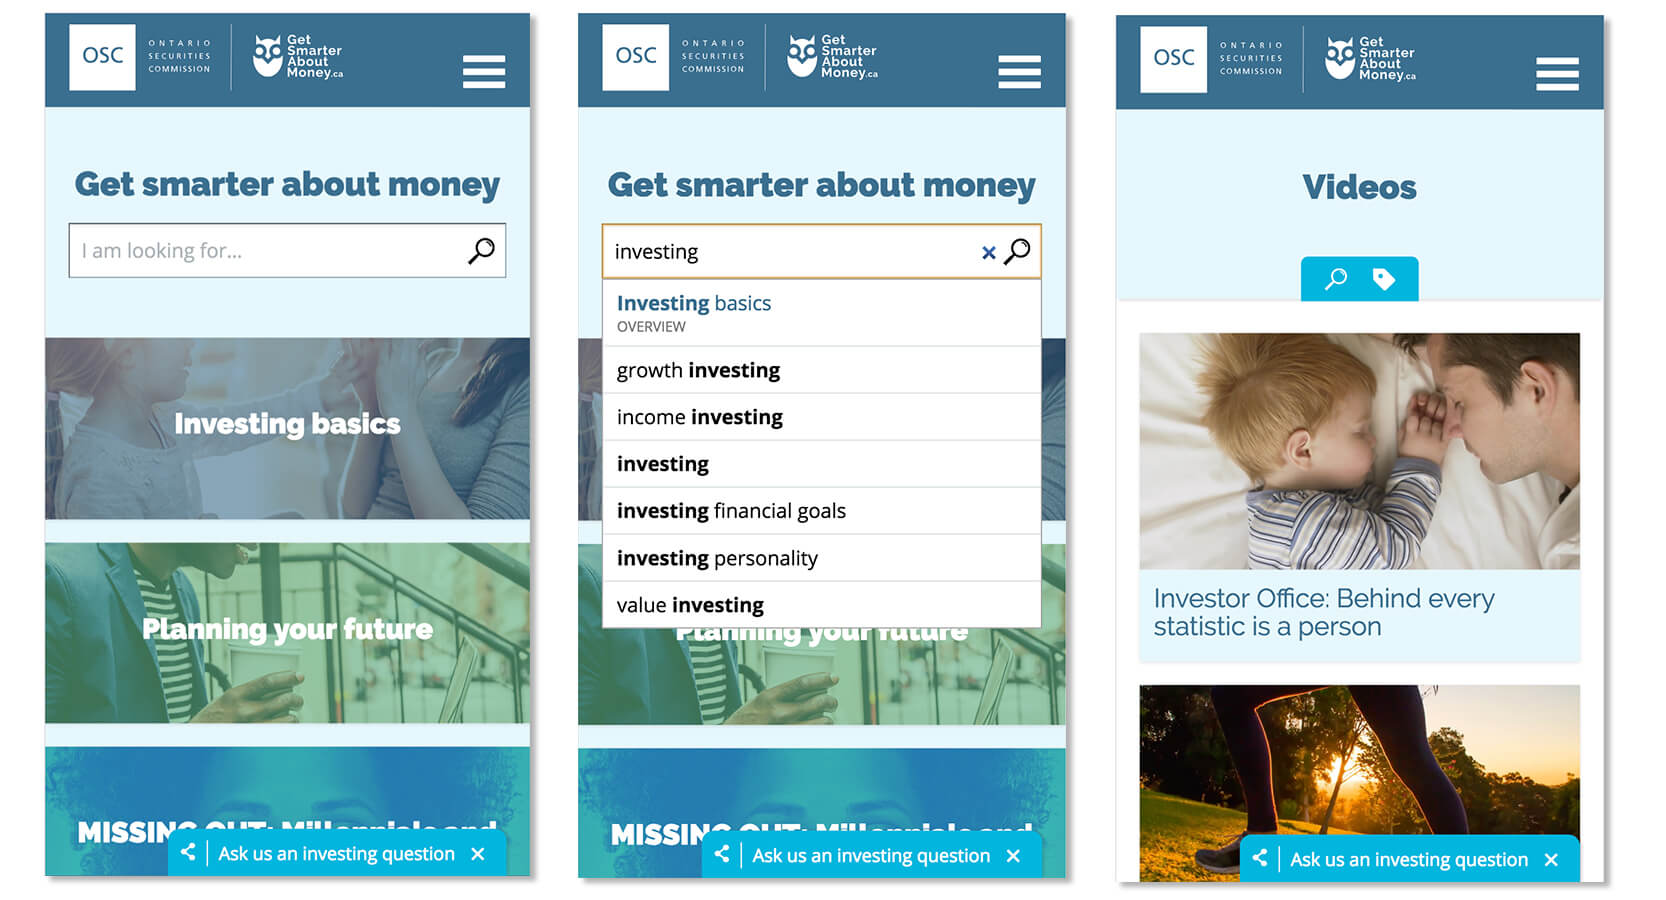 image of Ontario Securities Commission's Investor Office  Wins 2017 Best Information Services Mobile Website Mobile WebAward for Ontario Securities Commission's GetSmarterAboutMoney.ca